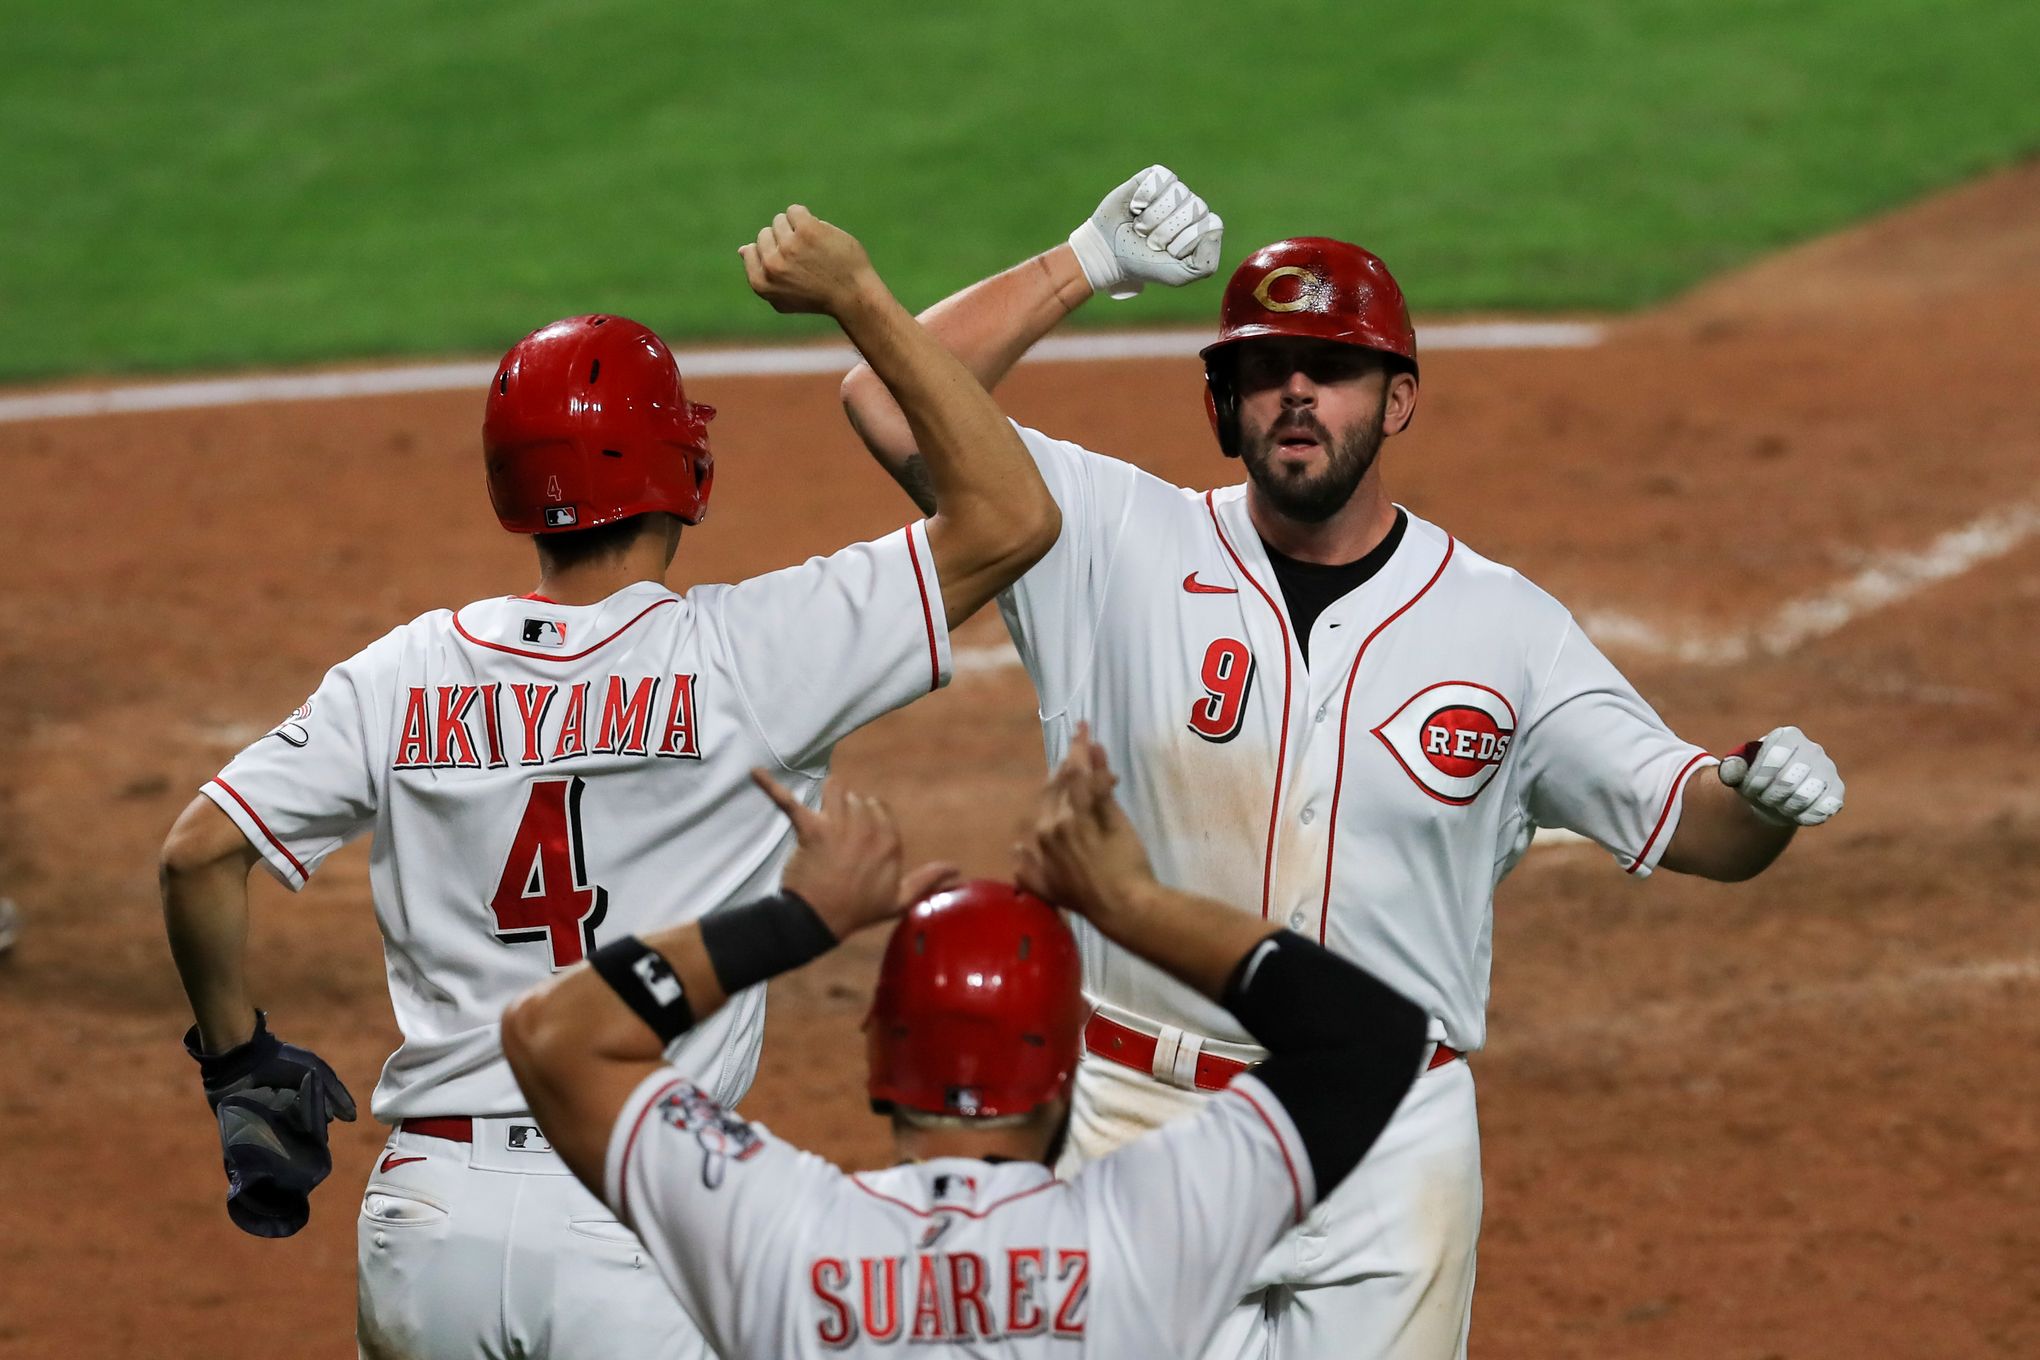 Joe, Keller lead Pirates over Reds 4-2 for 5th straight win